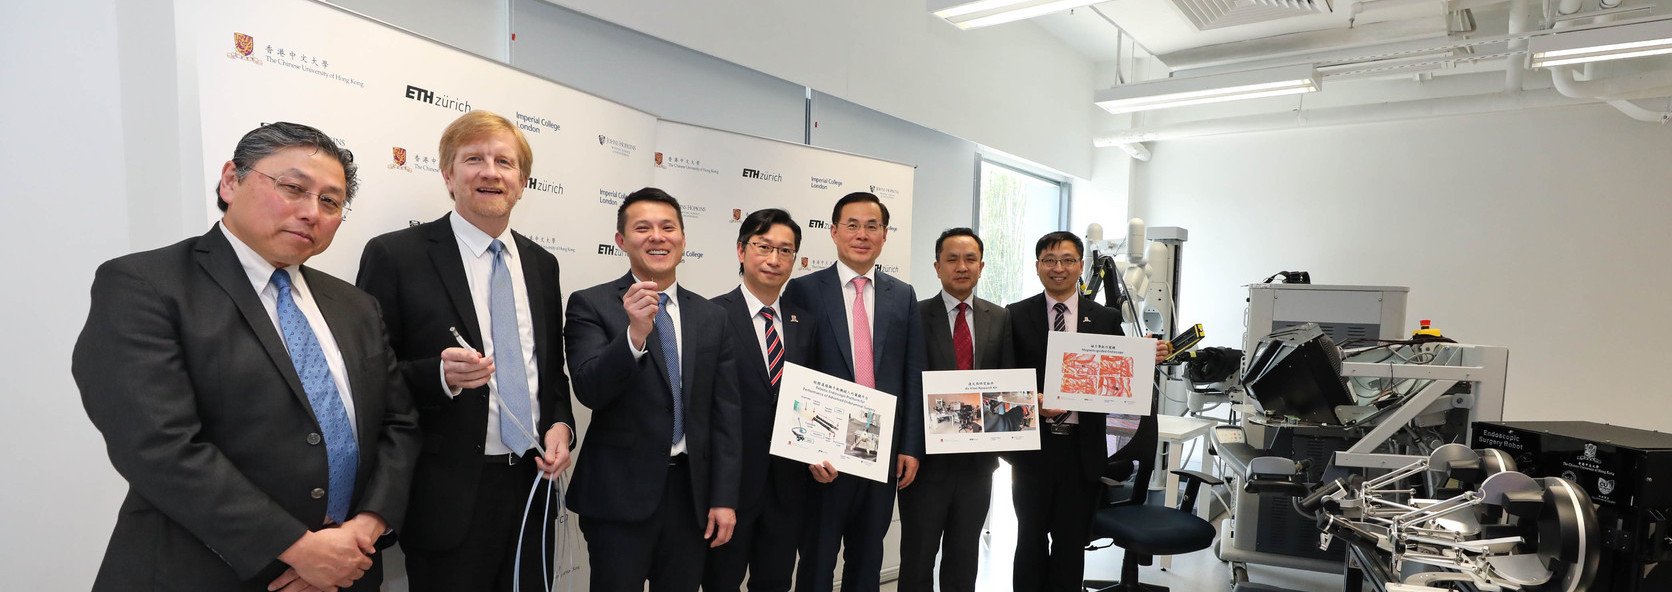 The three top-notch overseas institutions will collaborate with CUHK through the planned Multi-Scale Medical Robotics Centre (MRC) which aims to develop effective and accessible imaging and robotic technologies that will reshape the future of medical diagnosis and treatment of diseases in multiple specialties, and ultimately, improve the quality of life of patients. (From left: Dr. Larry NAGAHARA, Associate Dean of Research, Whiting School of Engineering,　Johns Hopkins University; Prof. Dr. Bradley NELSON, Director of the Multi-Scale Robotics Lab, Institute of Robotics and Intelligent Systems, ETH Zurich; Professor Samuel Kwok Wai AU, Co-Director, Multi-Scale Medical Robotic Centre and Associate Professor, Department of Mechanical and Automation Engineering, Faculty of Engineering, CUHK; Professor Philip Wai Yan CHIU, Co-Director, Multi-Scale Medical Robotic Centre and Professor, Department of Surgery, Faculty of Medicine, CUHK; Professor Guang-Zhong YANG, Director of the Hamlyn Centre